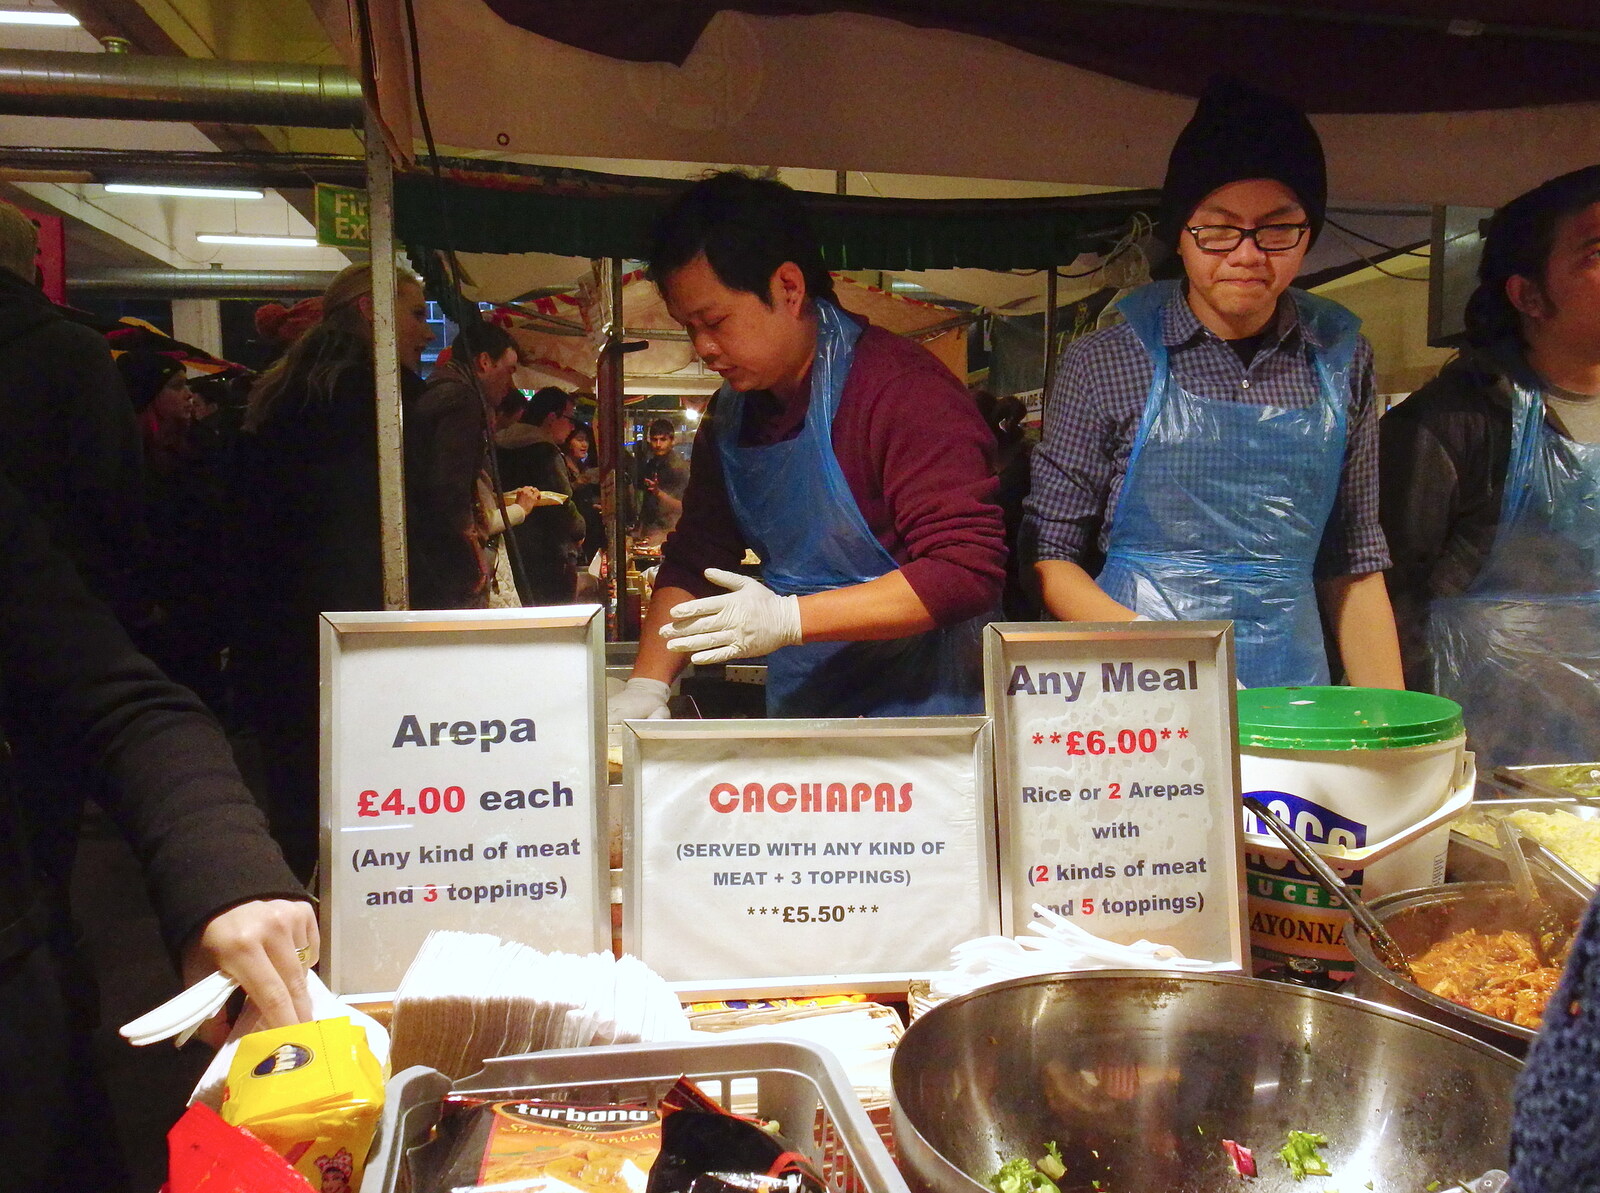 The Venezuelan street food stall from Lunch in the East End, Spitalfields and Brick Lane, London - 1st December 2013